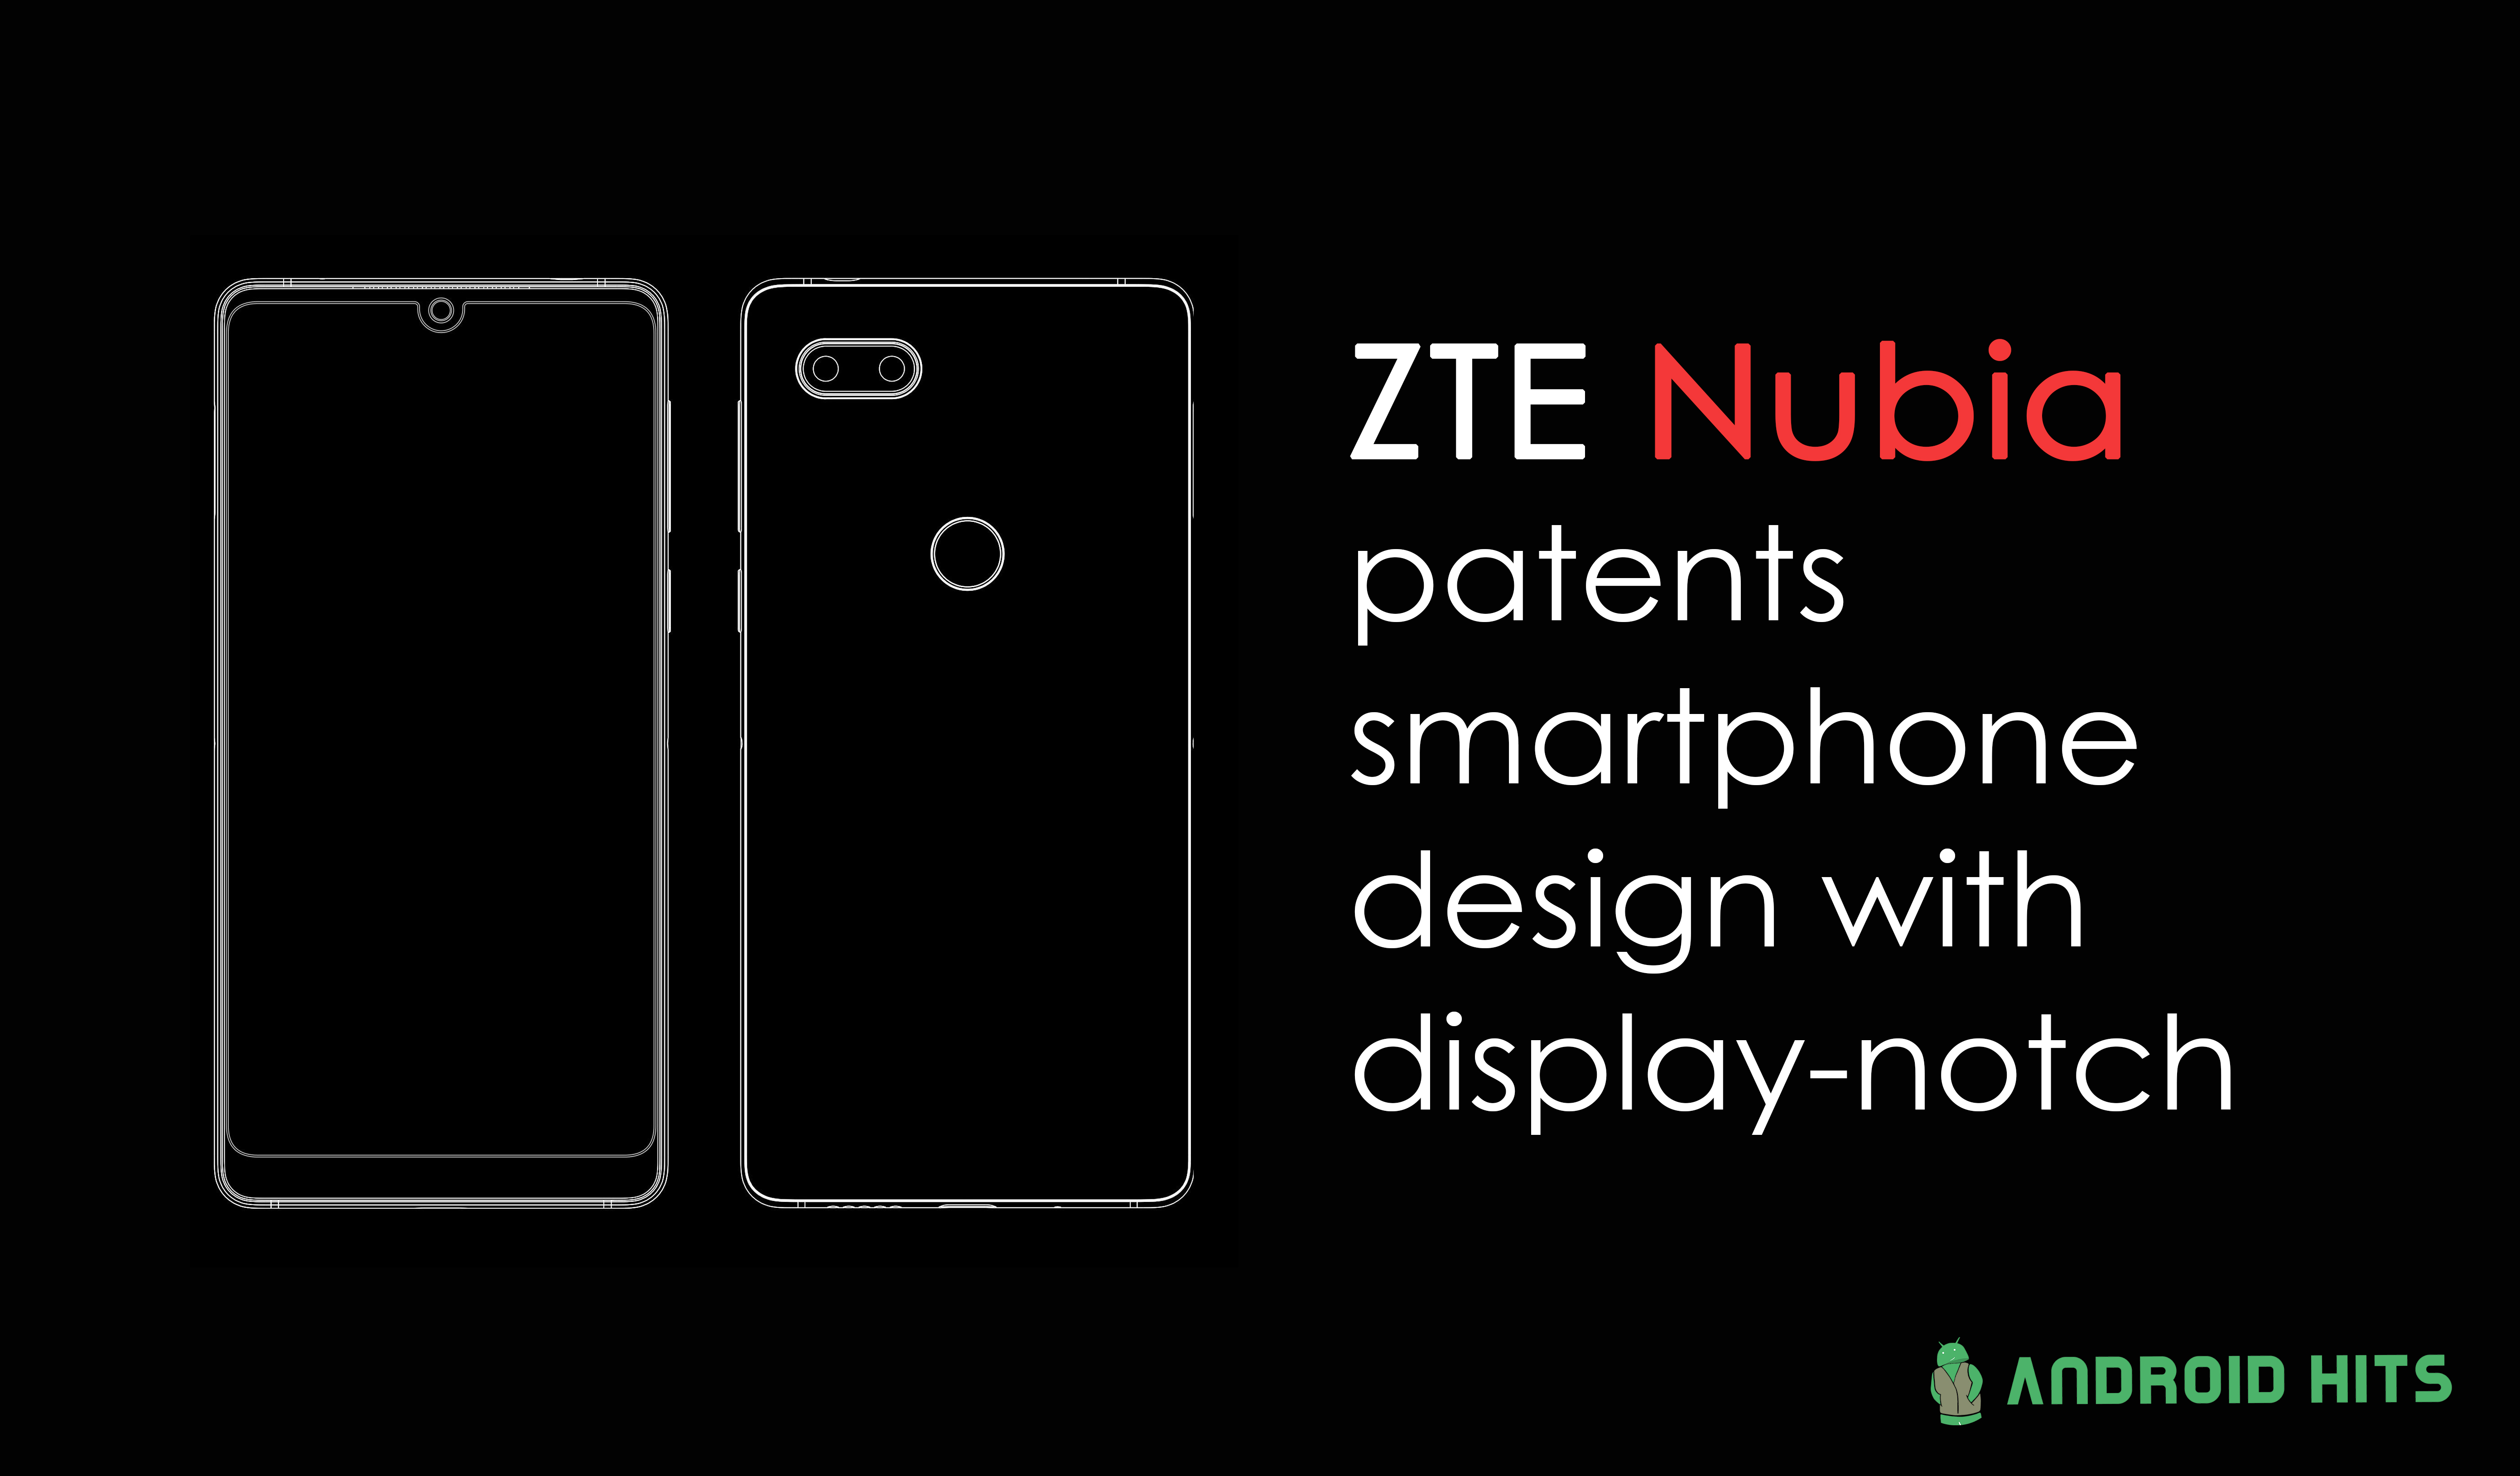 ZTE Nubia patents smartphone design with display-notch; could be Nubia Z19 4